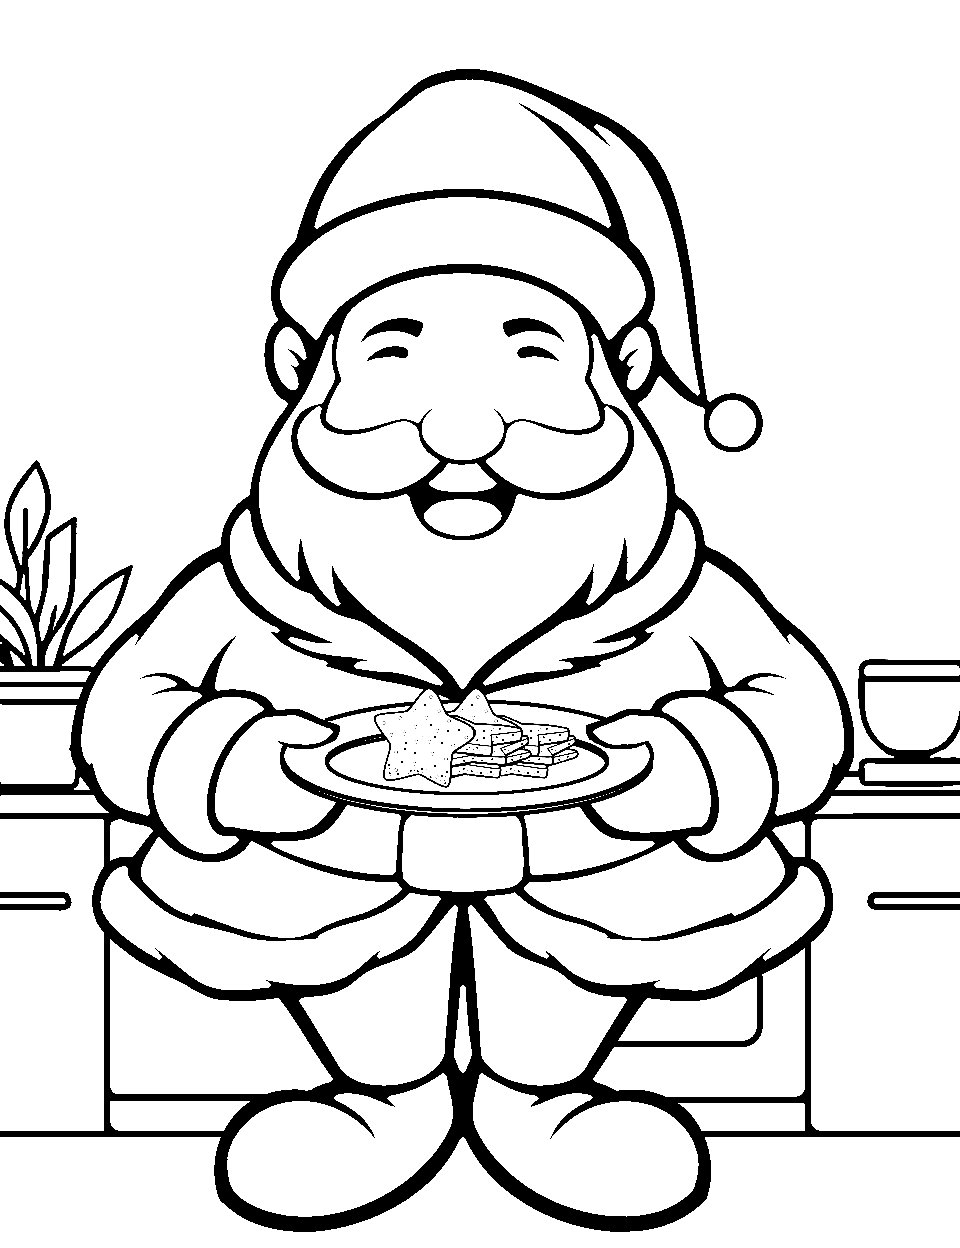 Mr. Claus Baking Cookies Coloring Page - Mr. Claus in his kitchen, baking a batch of Christmas cookies.